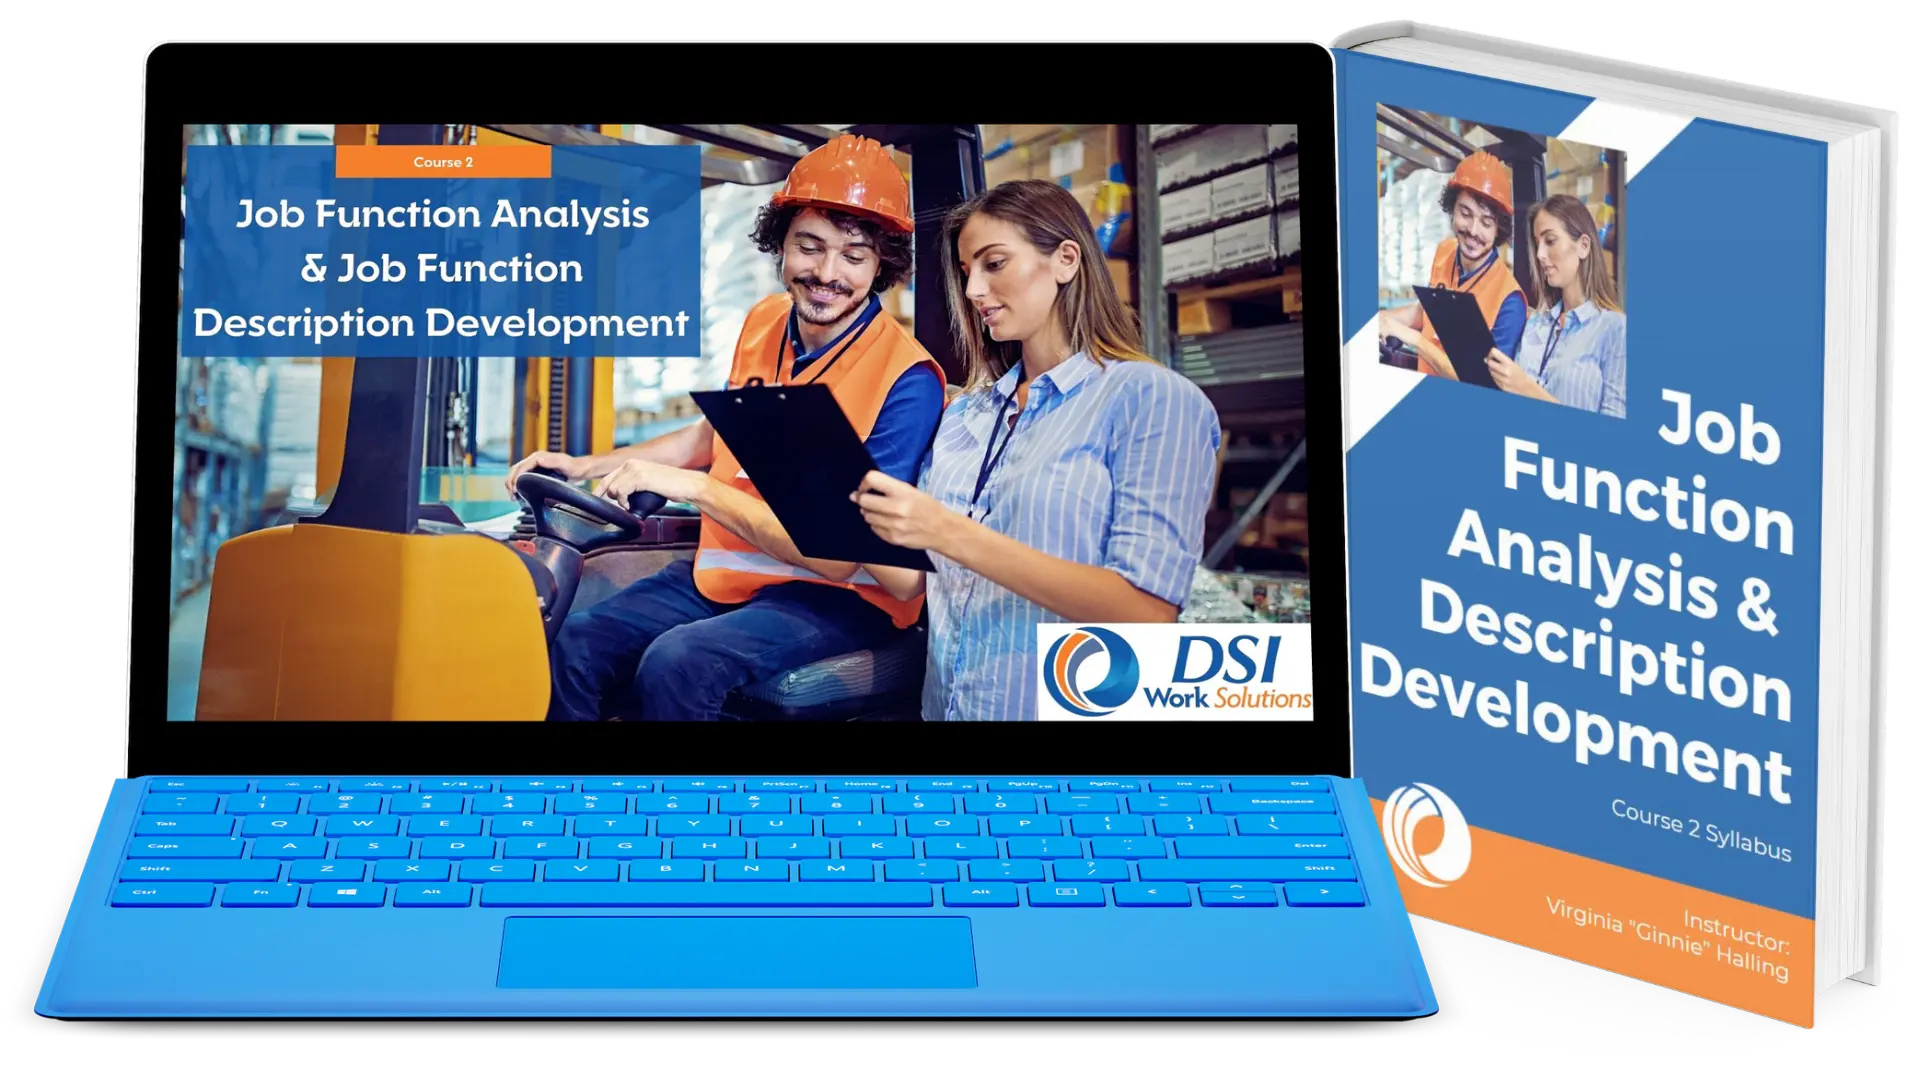 A laptop with the Job Function Analysis & Description Development Independent Learning Course on the screen next to the manual.